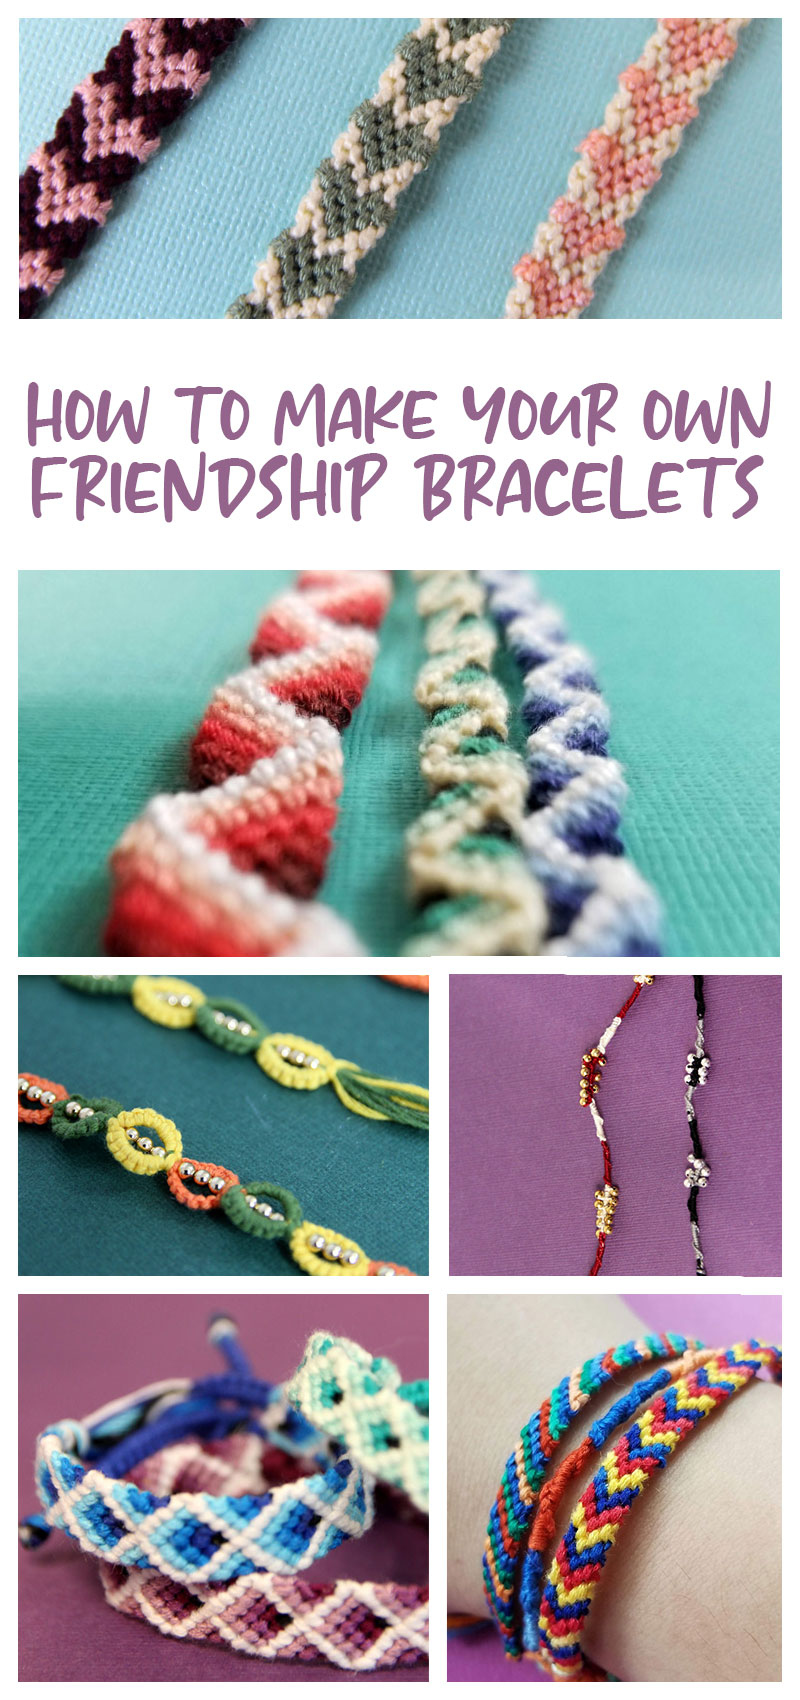 4 Friendship Bracelets Perfect for Beginners